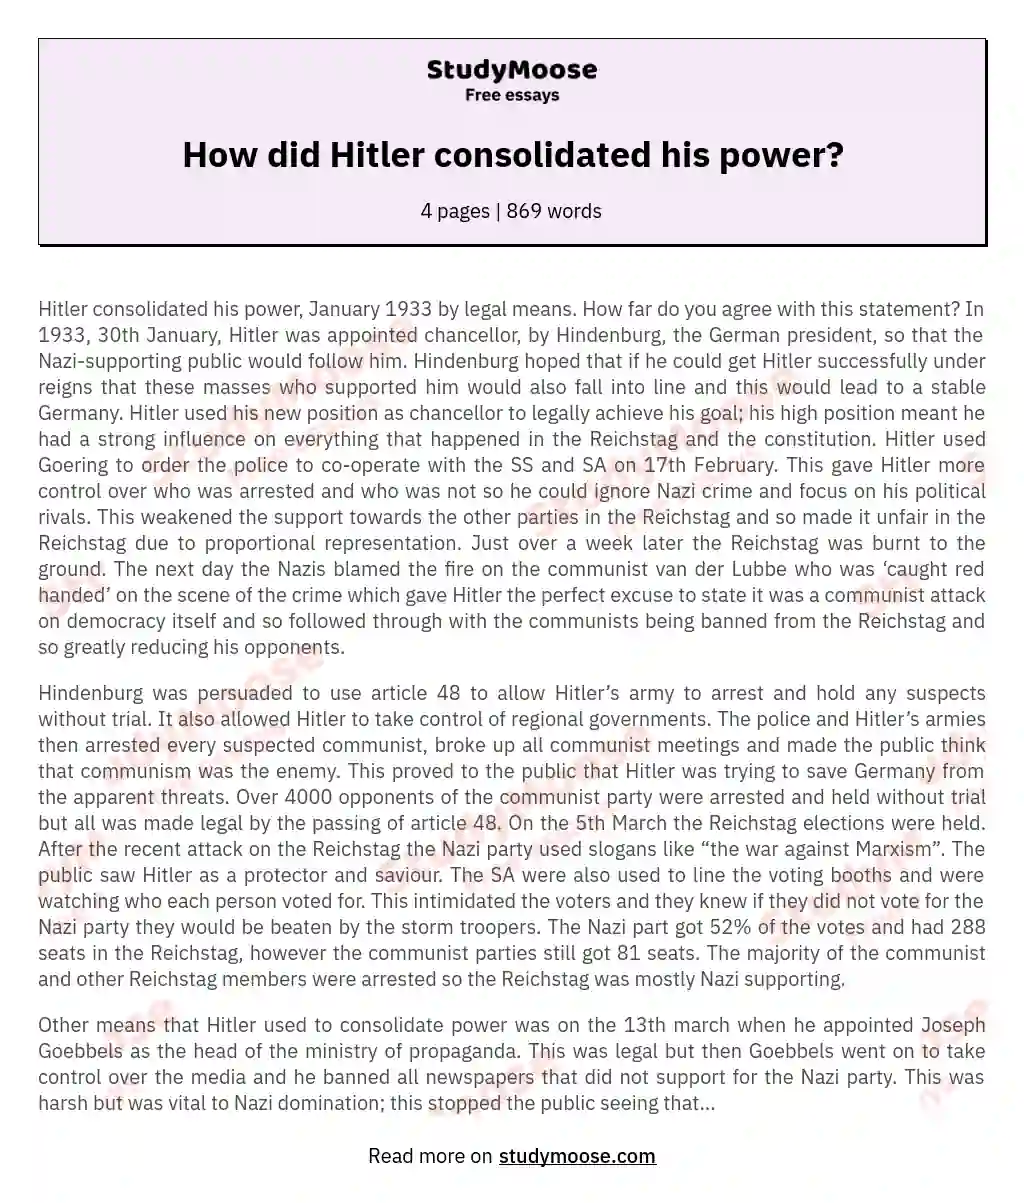 How did Hitler consolidated his power? essay